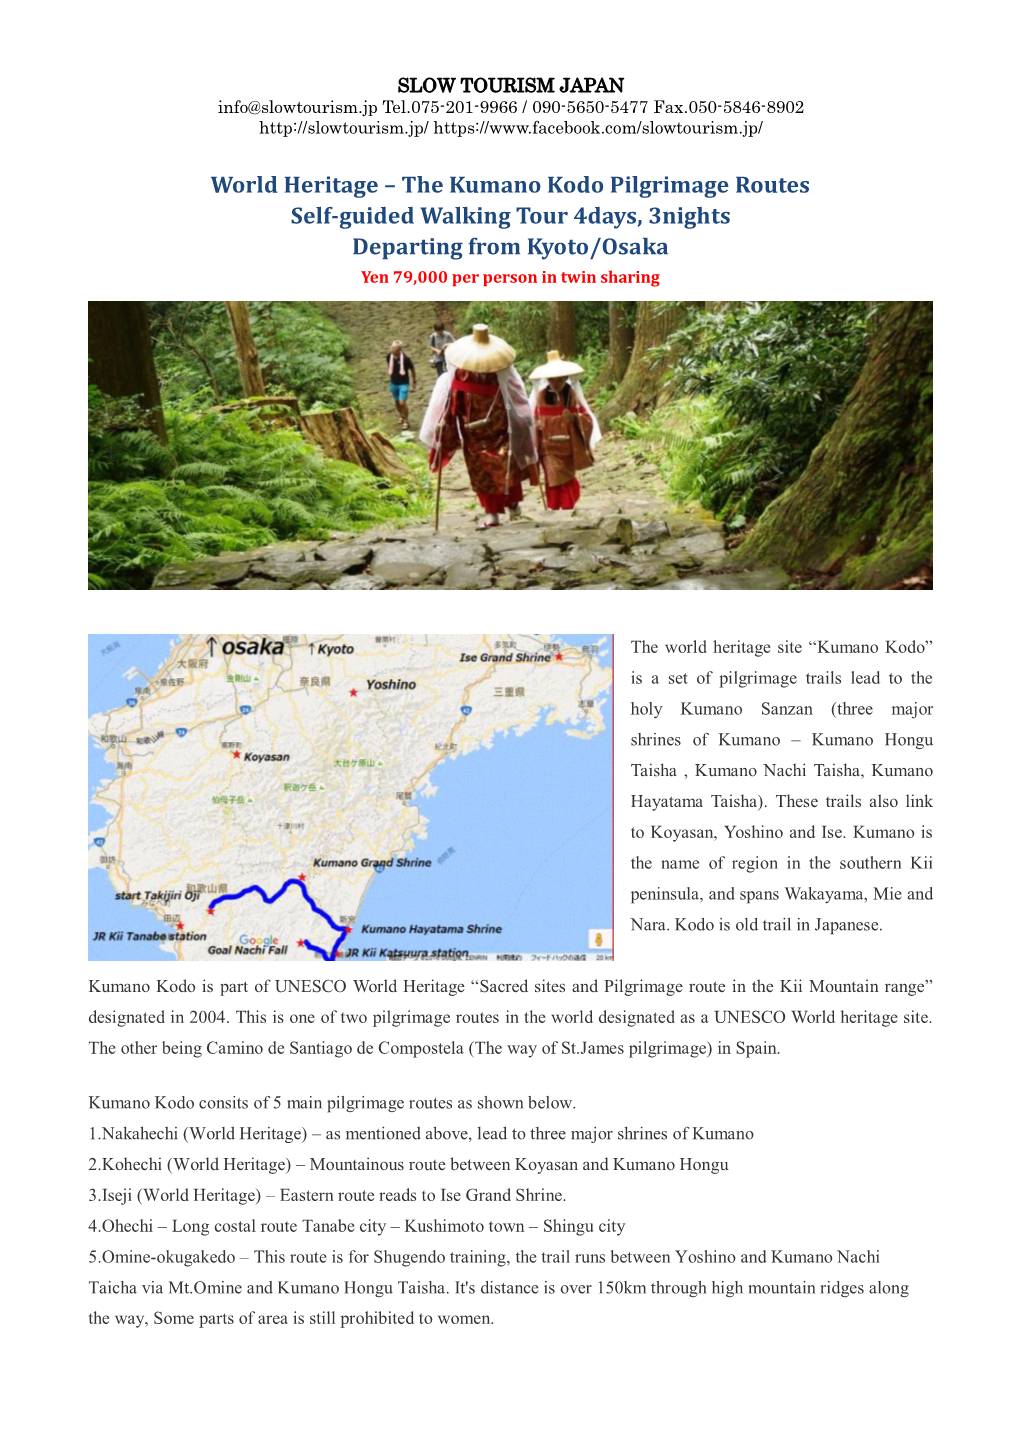 The Kumano Kodo Pilgrimage Routes Self-Guided Walking Tour 4Days, 3Nights Departing from Kyoto/Osaka Yen 79,000 Per Person in Twin Sharing